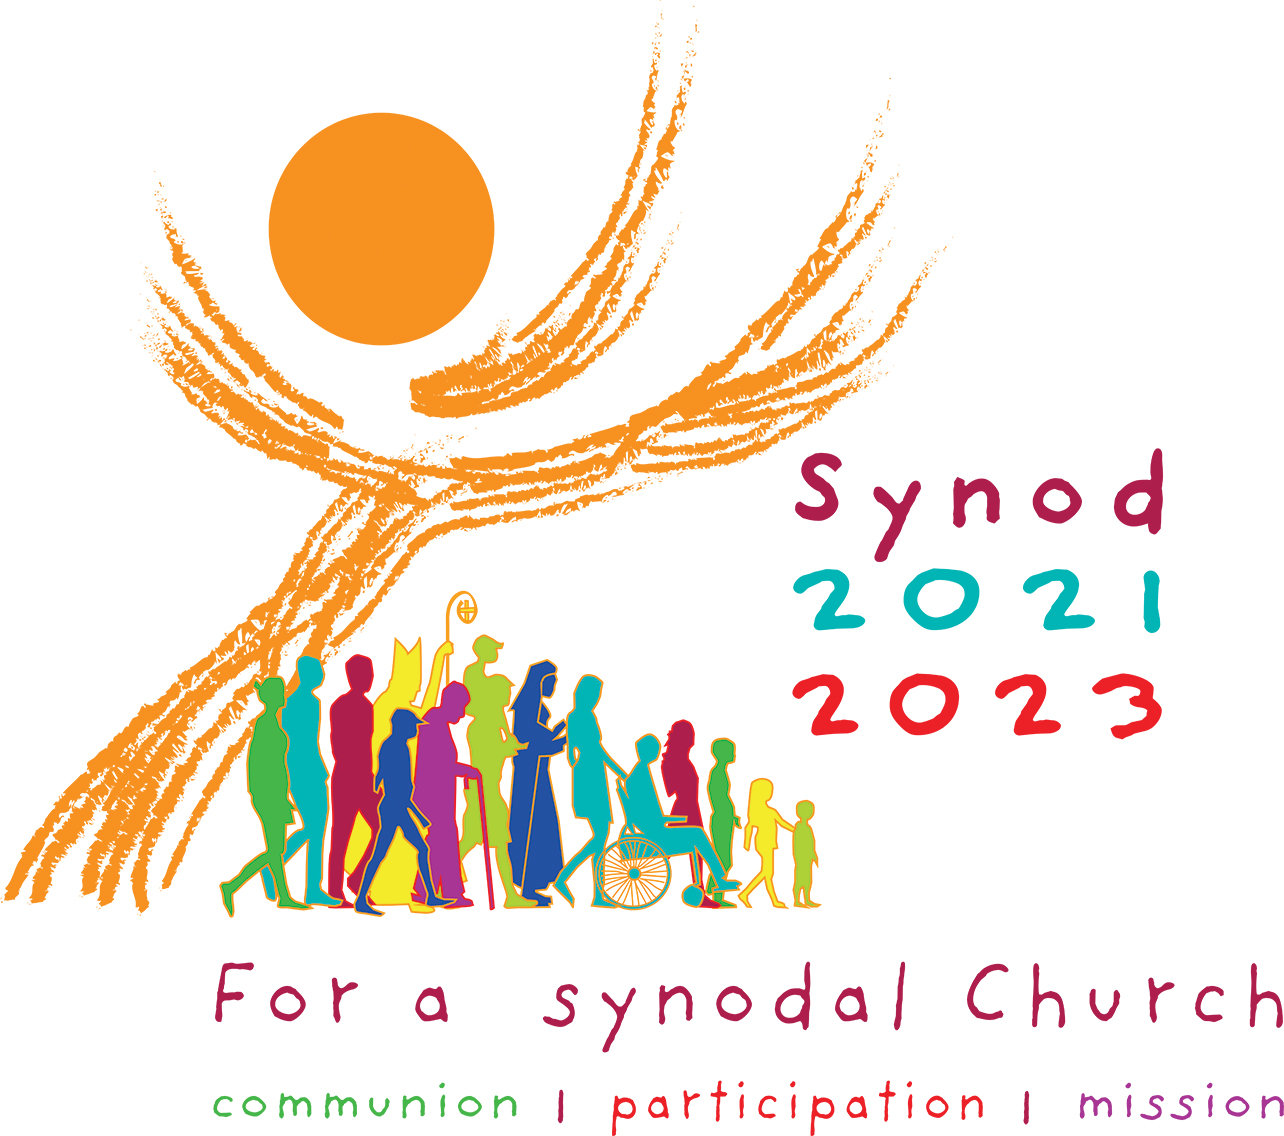 This is the official logo for the XVI Ordinary General Assembly of the Synod of Bishops. The synod will take place in Rome in October 2023. Listening sessions are taking place in the deaneries of the archdiocese during Lent.